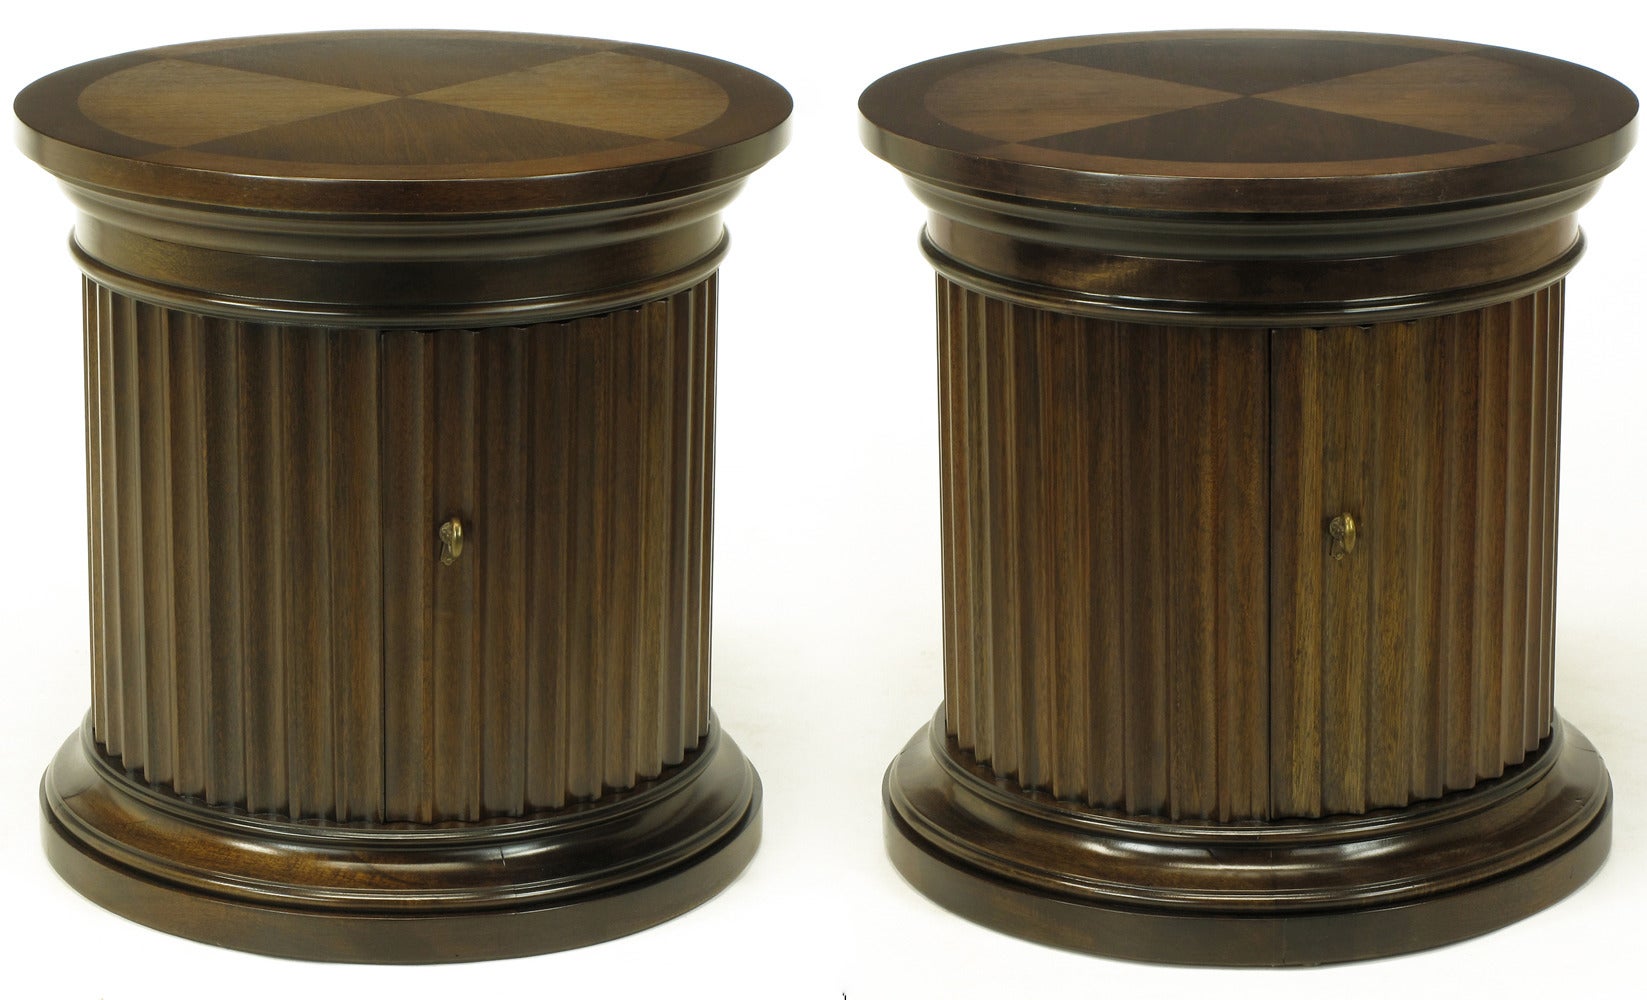 Pair of Drexel "Di Moda" Collection Fluted Column Parquetry Top End Tables